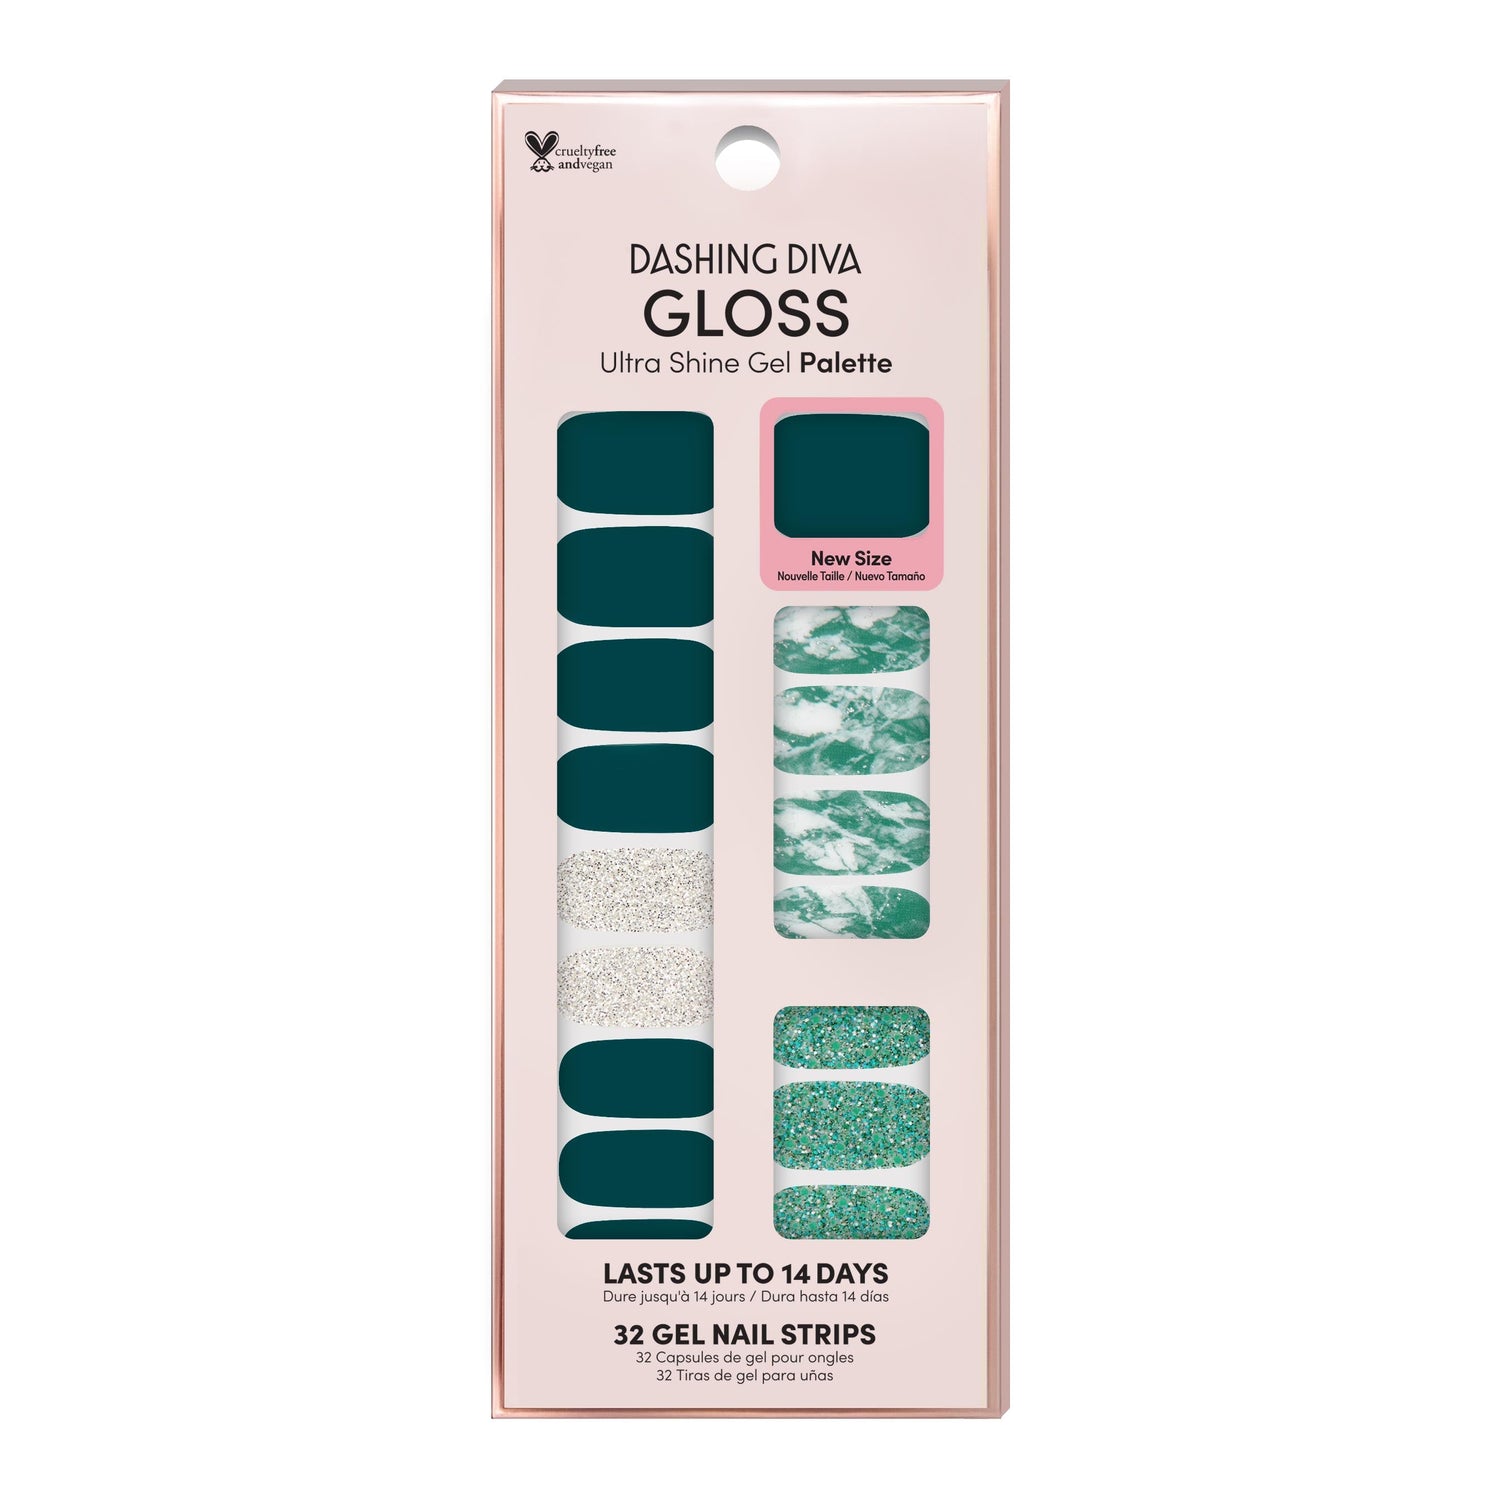 Dashing Diva GLOSS green gel nail strips with marble and silver and green glitter accents.